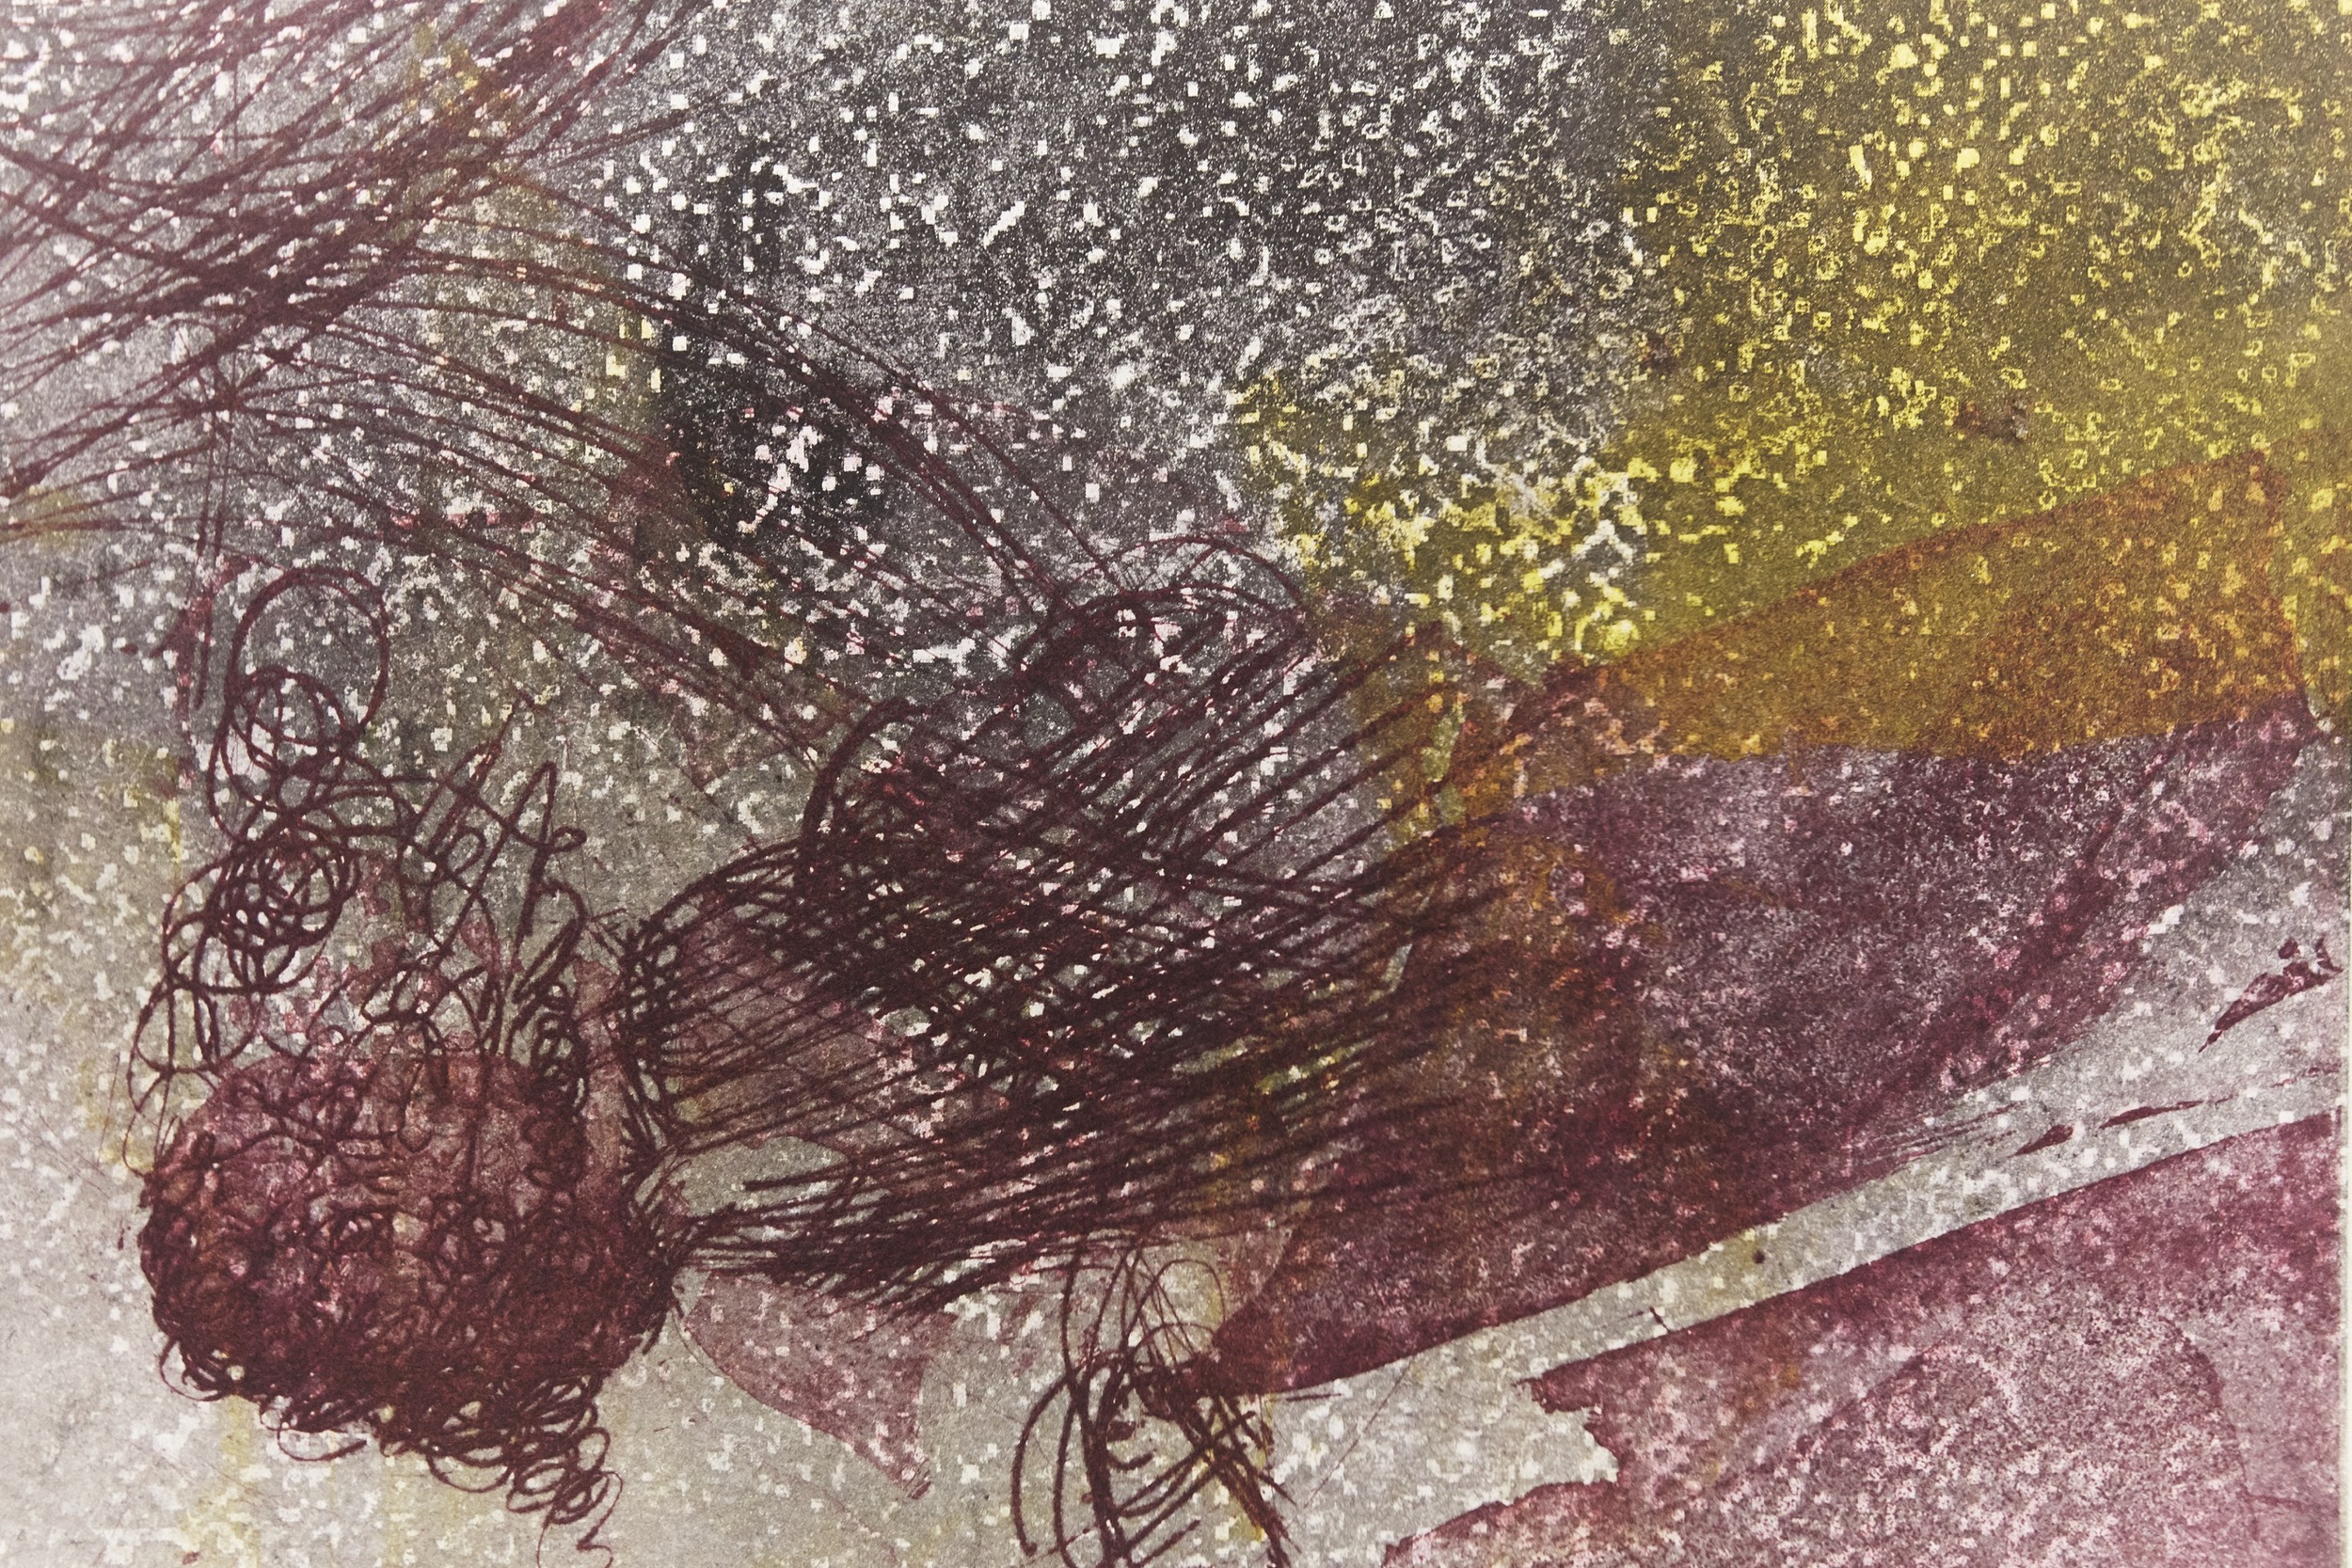 Sharon Lindenfeld, Detail: Particle #2, 2014